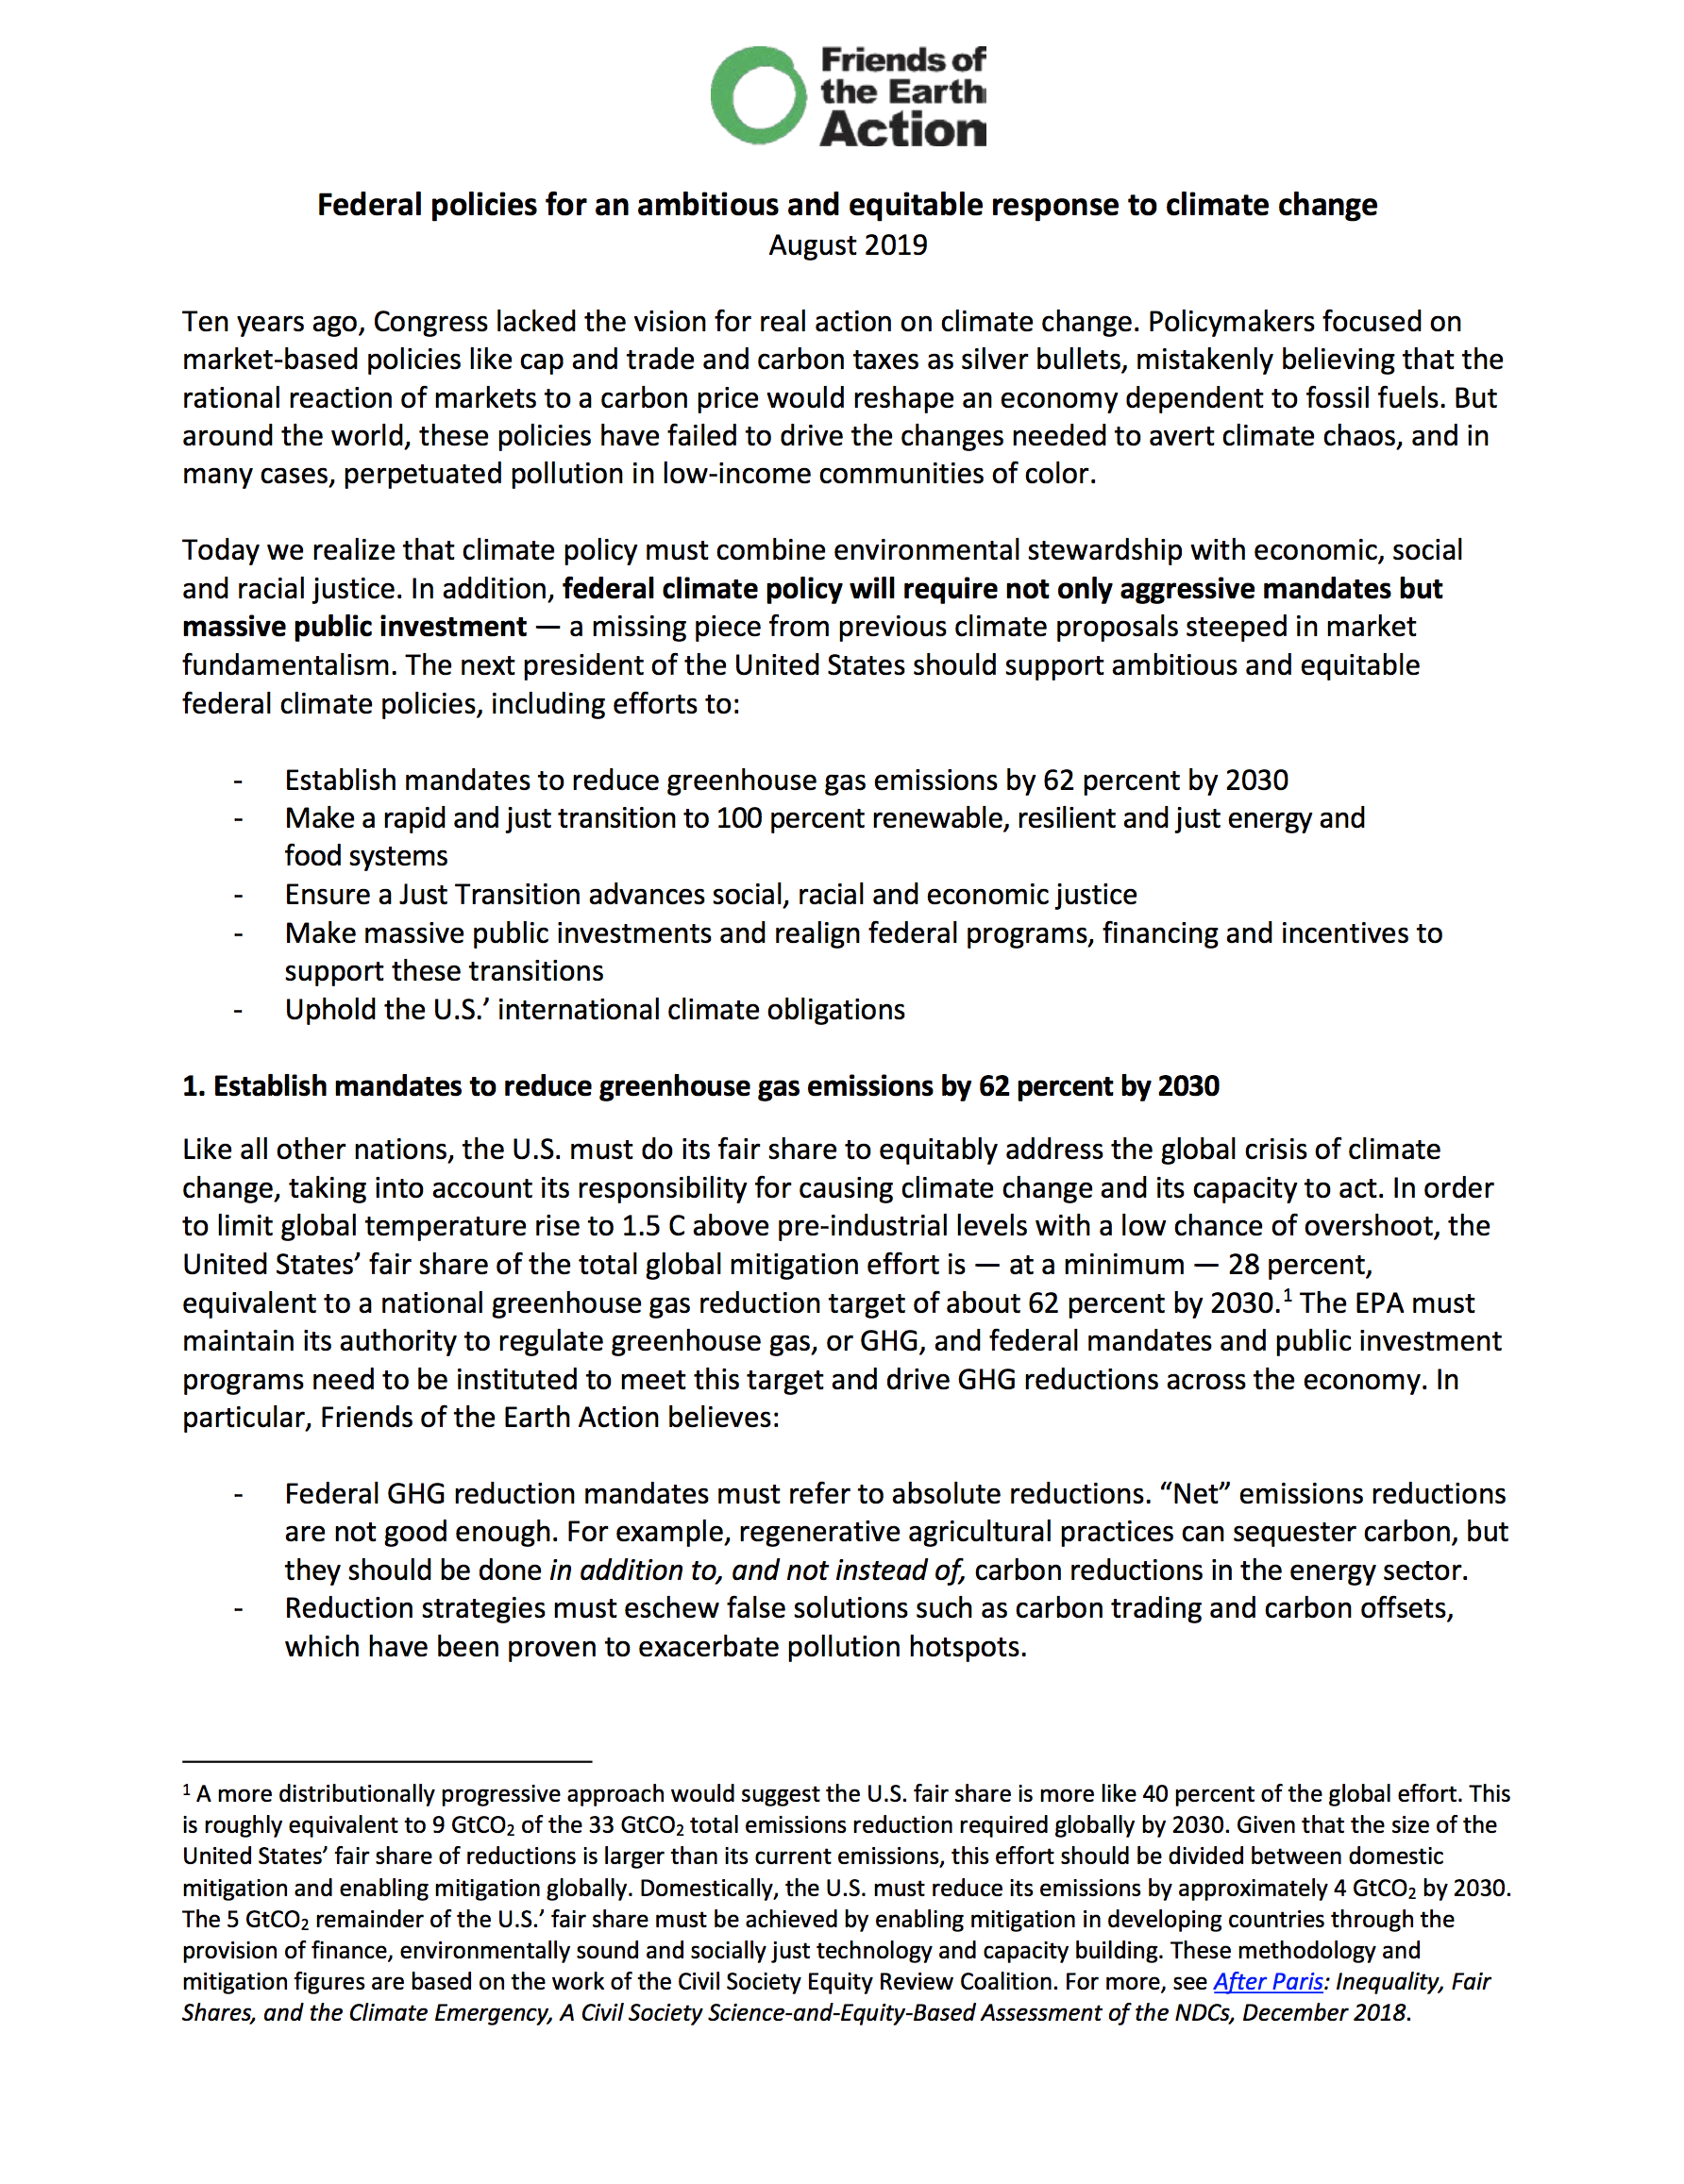 Climate Change Policy Campaign: Position Paper